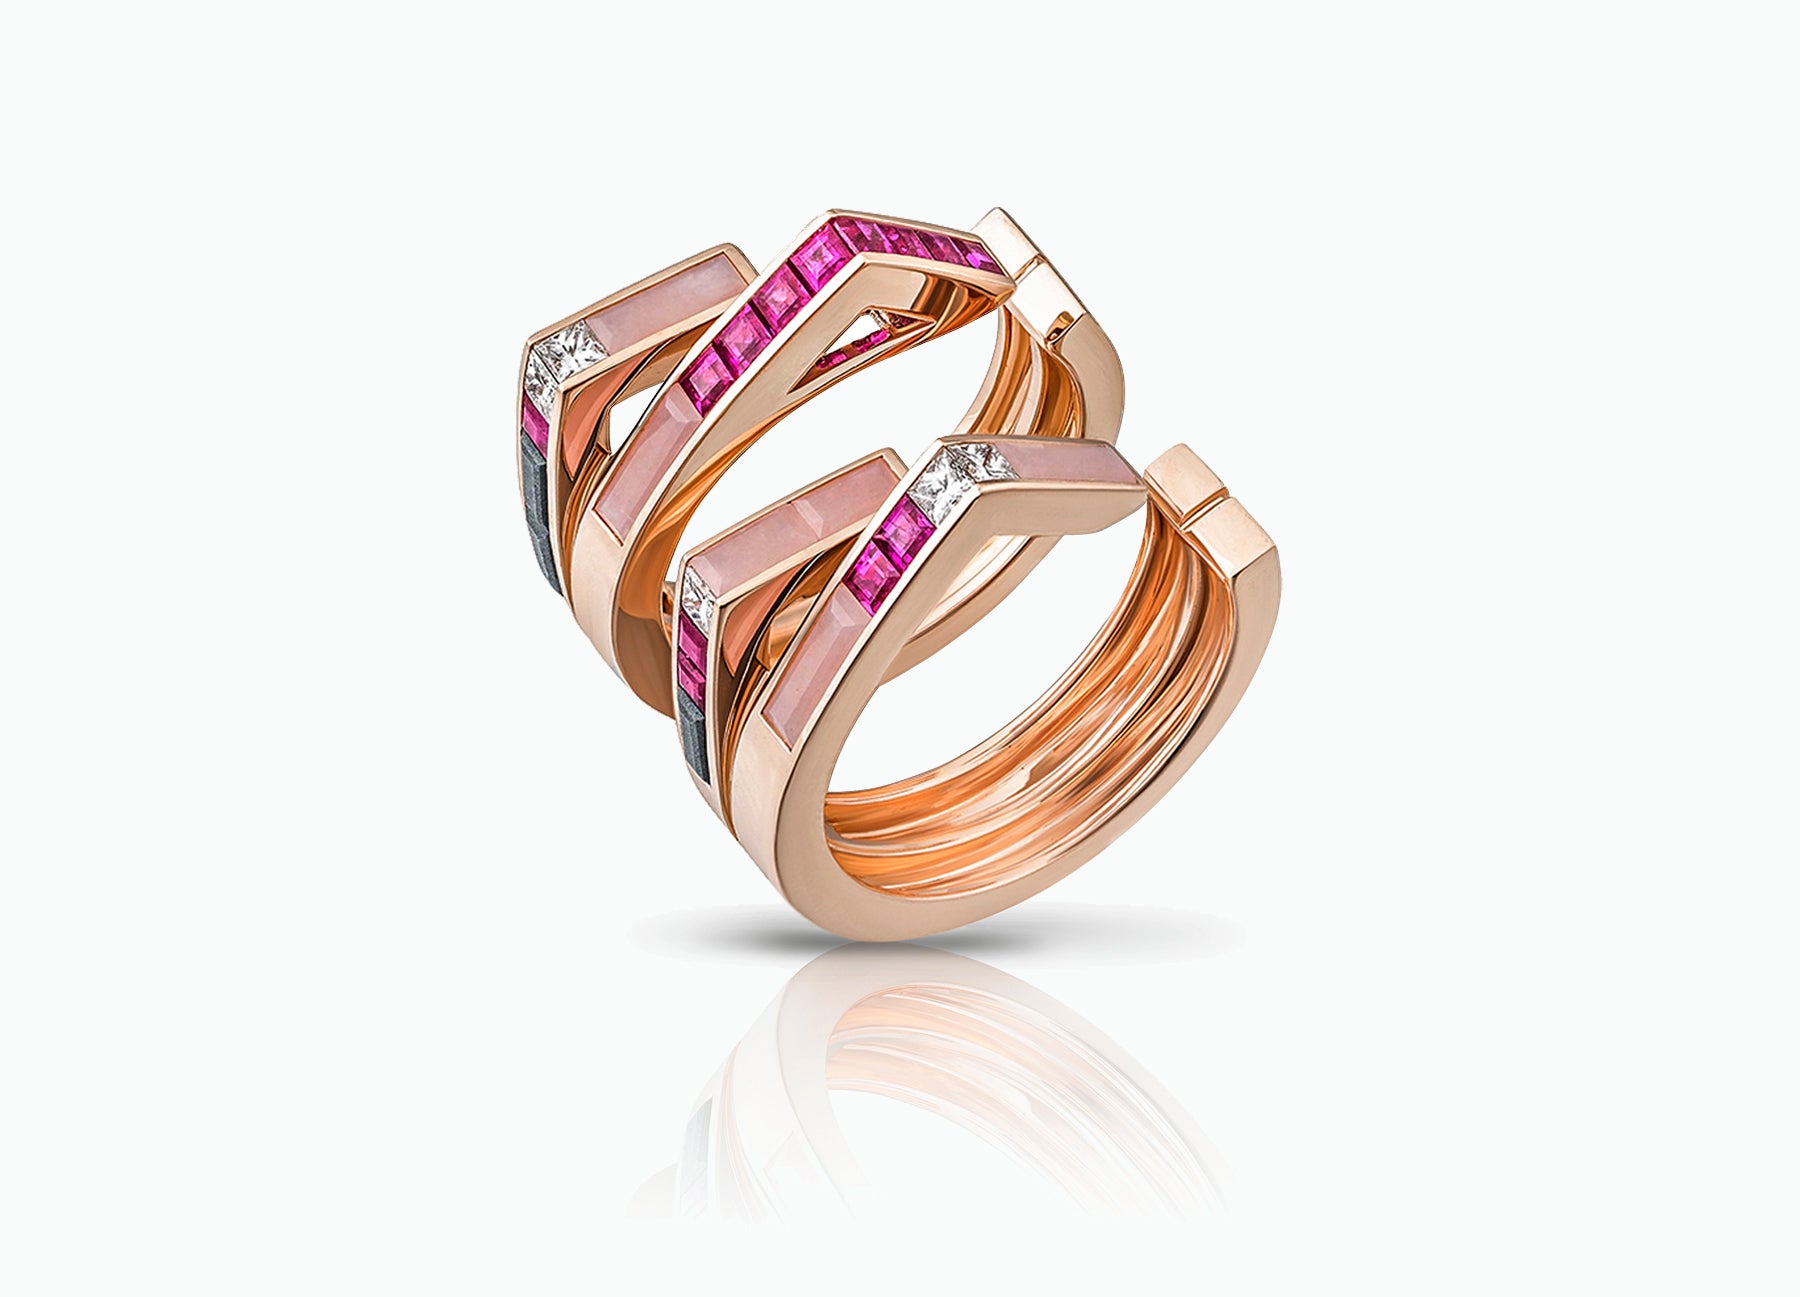 Stellar Pair of Stacking rings in 18K rose gold set with rubies and diamonds and pink opal by Tomasz Donocik Seen apart three quarter view